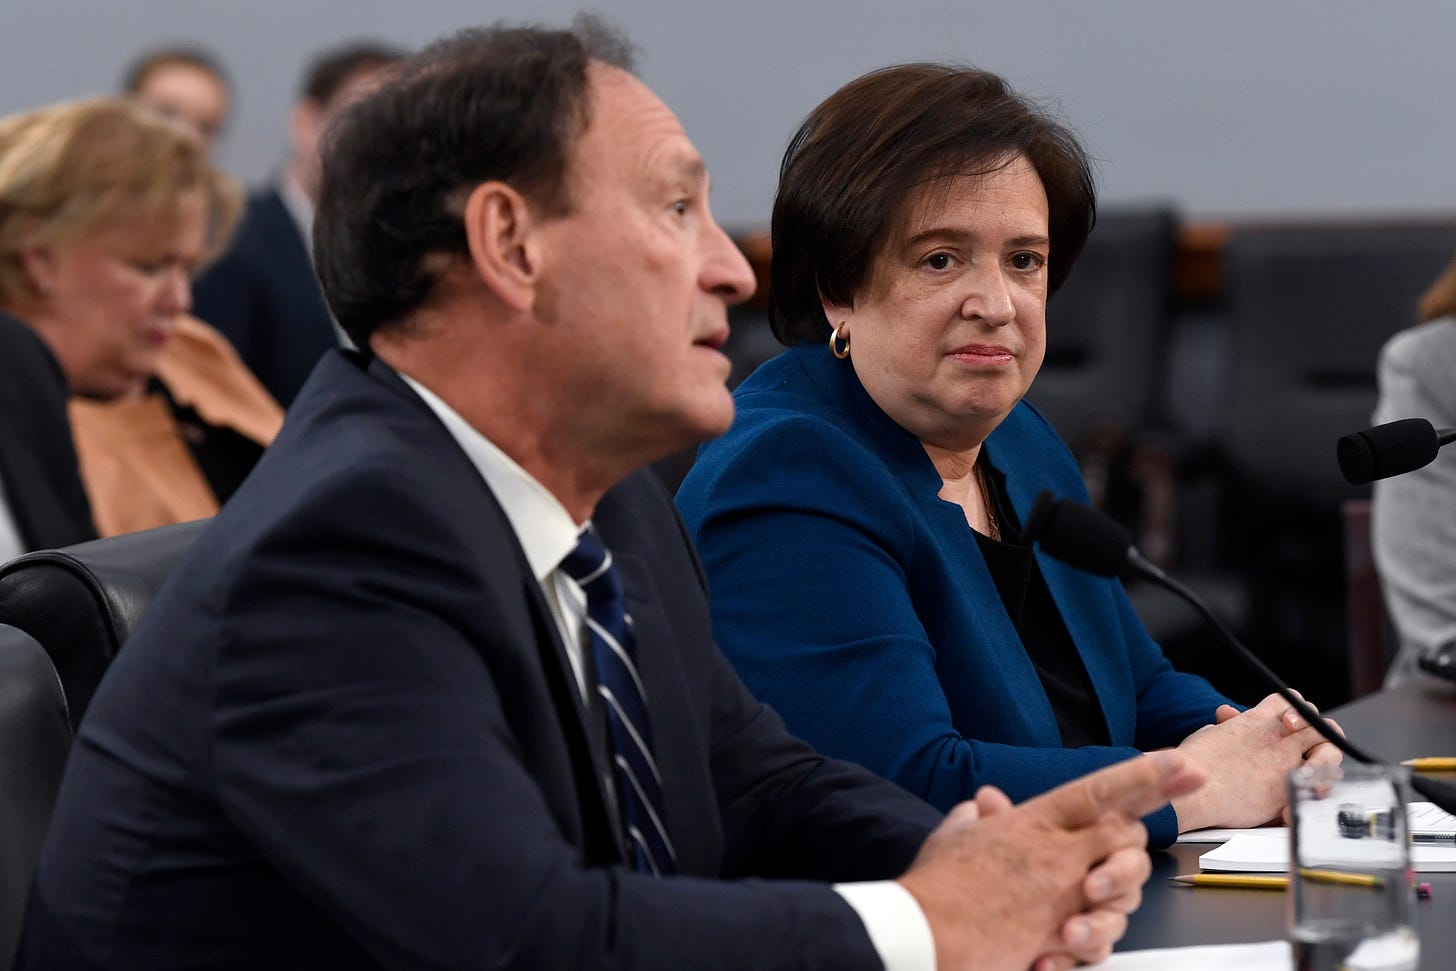 Supreme Court Justices Samuel Alito, left, and Elena Kagan, right, testify before the House Appropriations Committee on Capitol Hill.